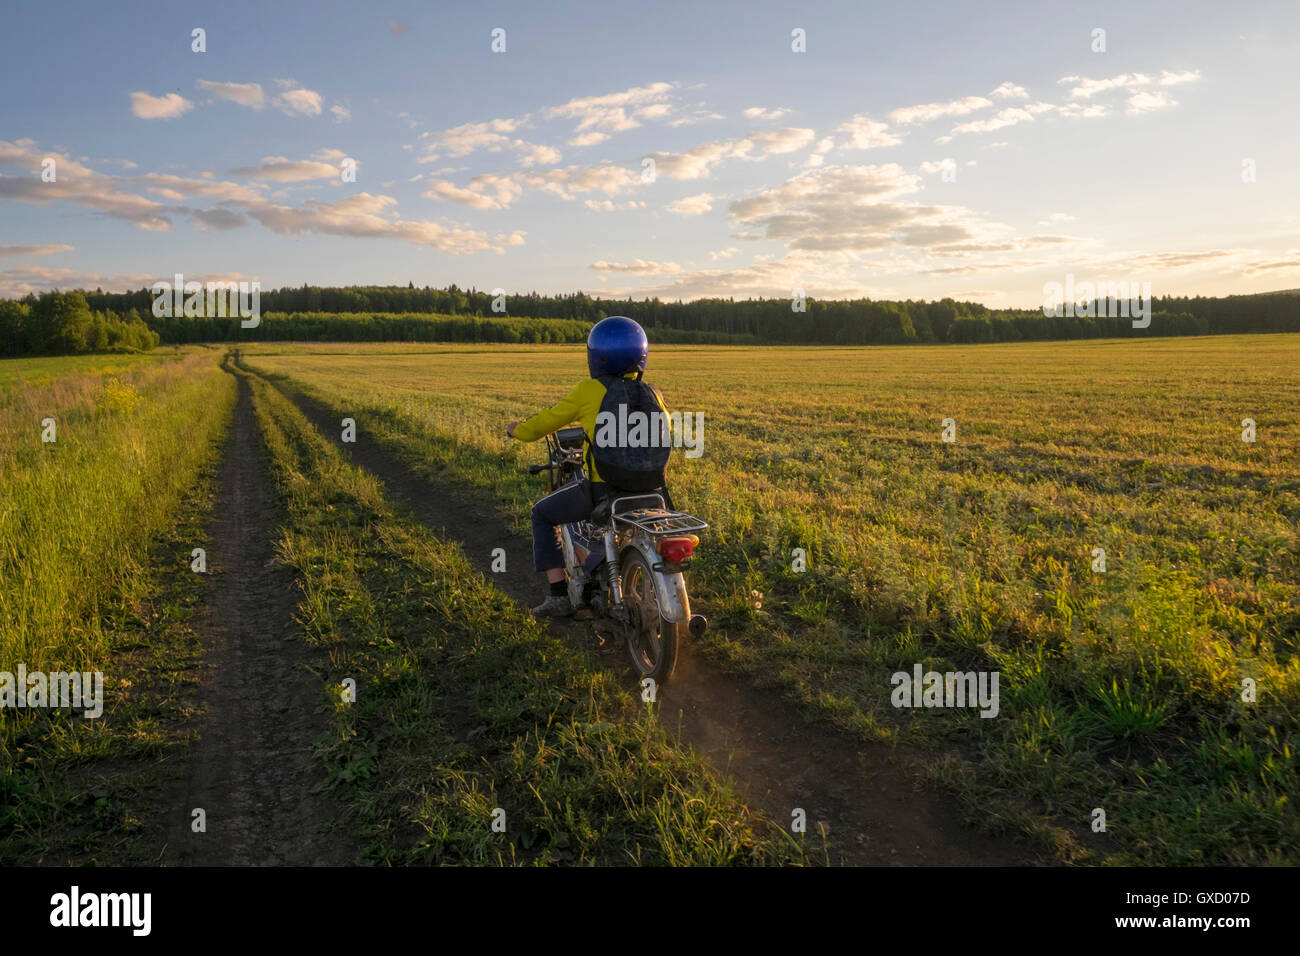 Rear view of boy riding bicycle on dirt track through field Stock Photo